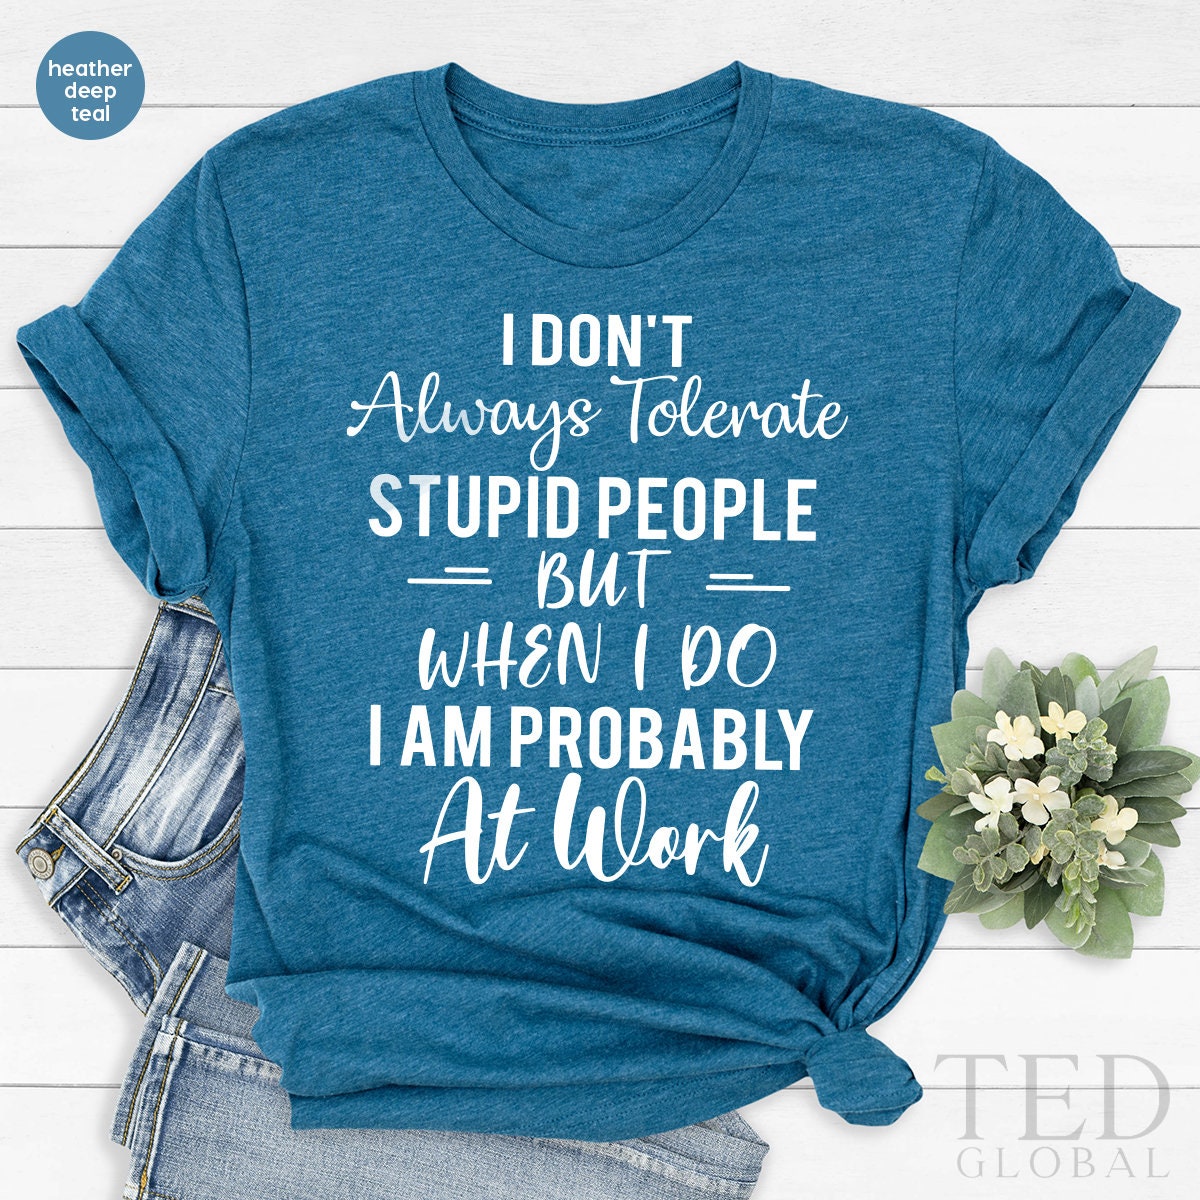 Sarcastic Co-Worker T-Shirt, Always Tolerate T Shirt, Funny Boss Gift, Collage Shirts, Employer TShirt, Funny Work Tees, Stupid People Tee - Fastdeliverytees.com